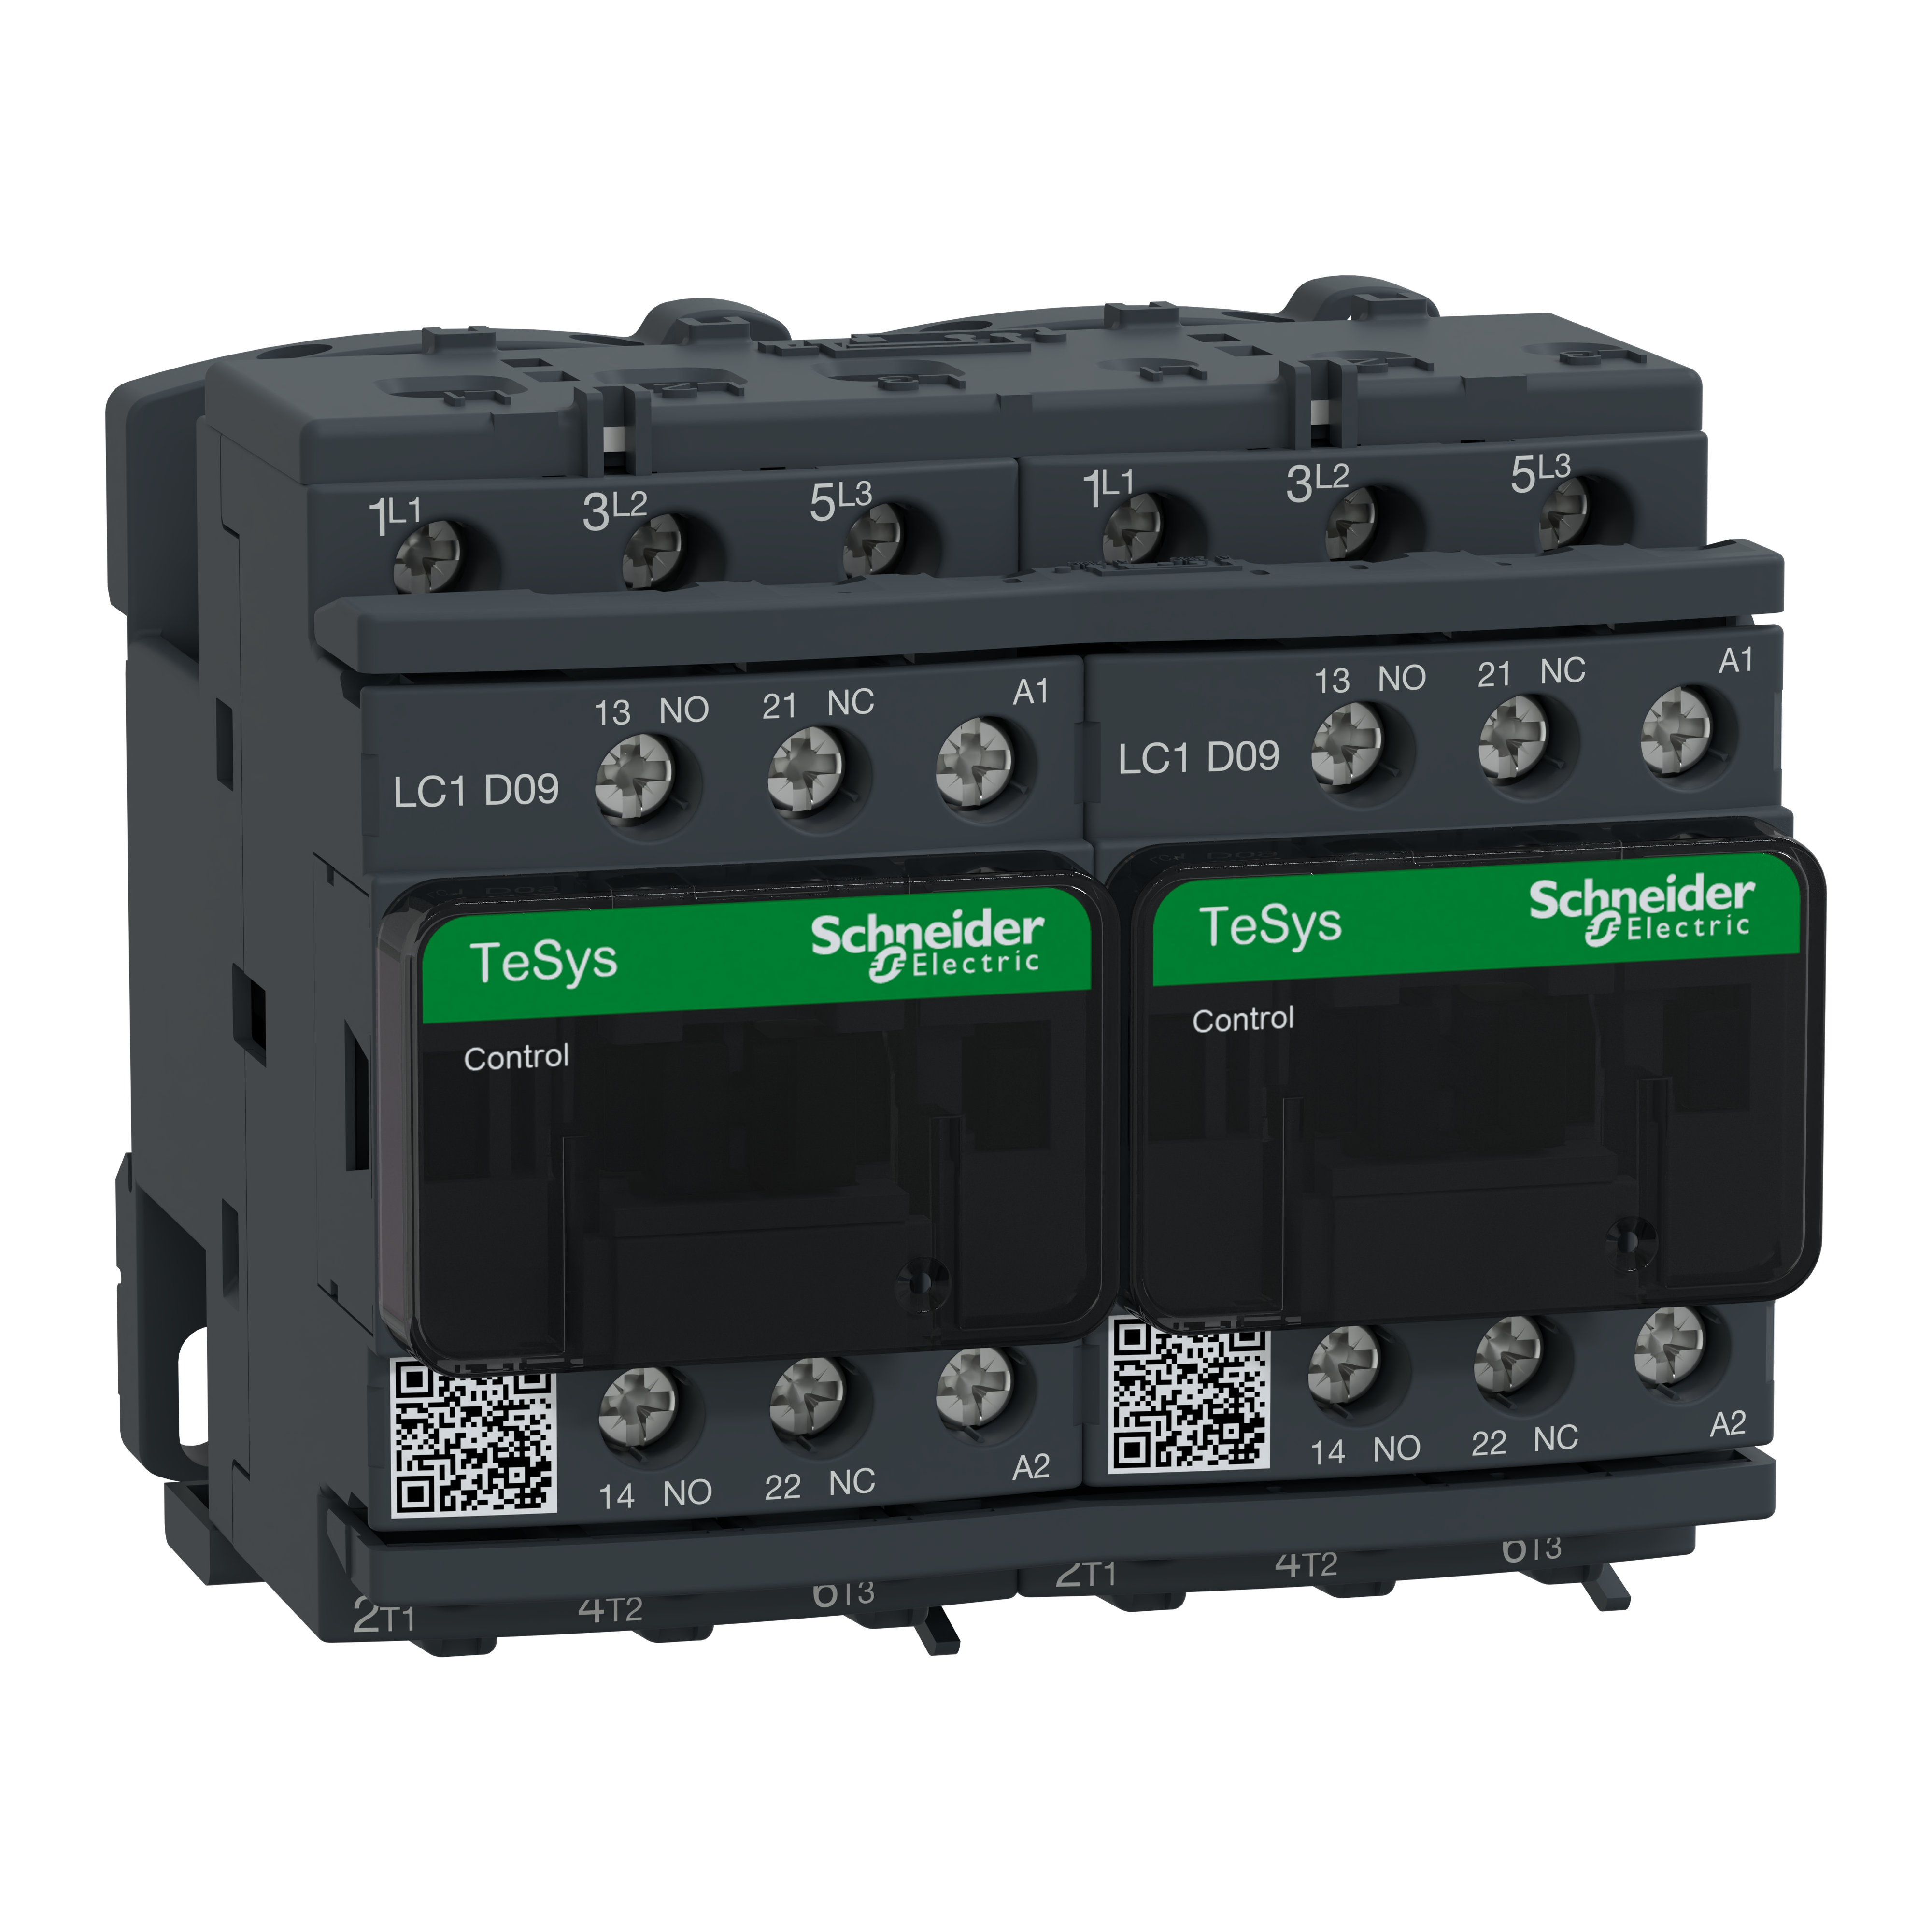 IEC contactor, TeSys Deca reversing, 9A, 5HP at 480VAC, 3 phase, 3P, 3NO, 120VAC 50/60Hz coil, open style